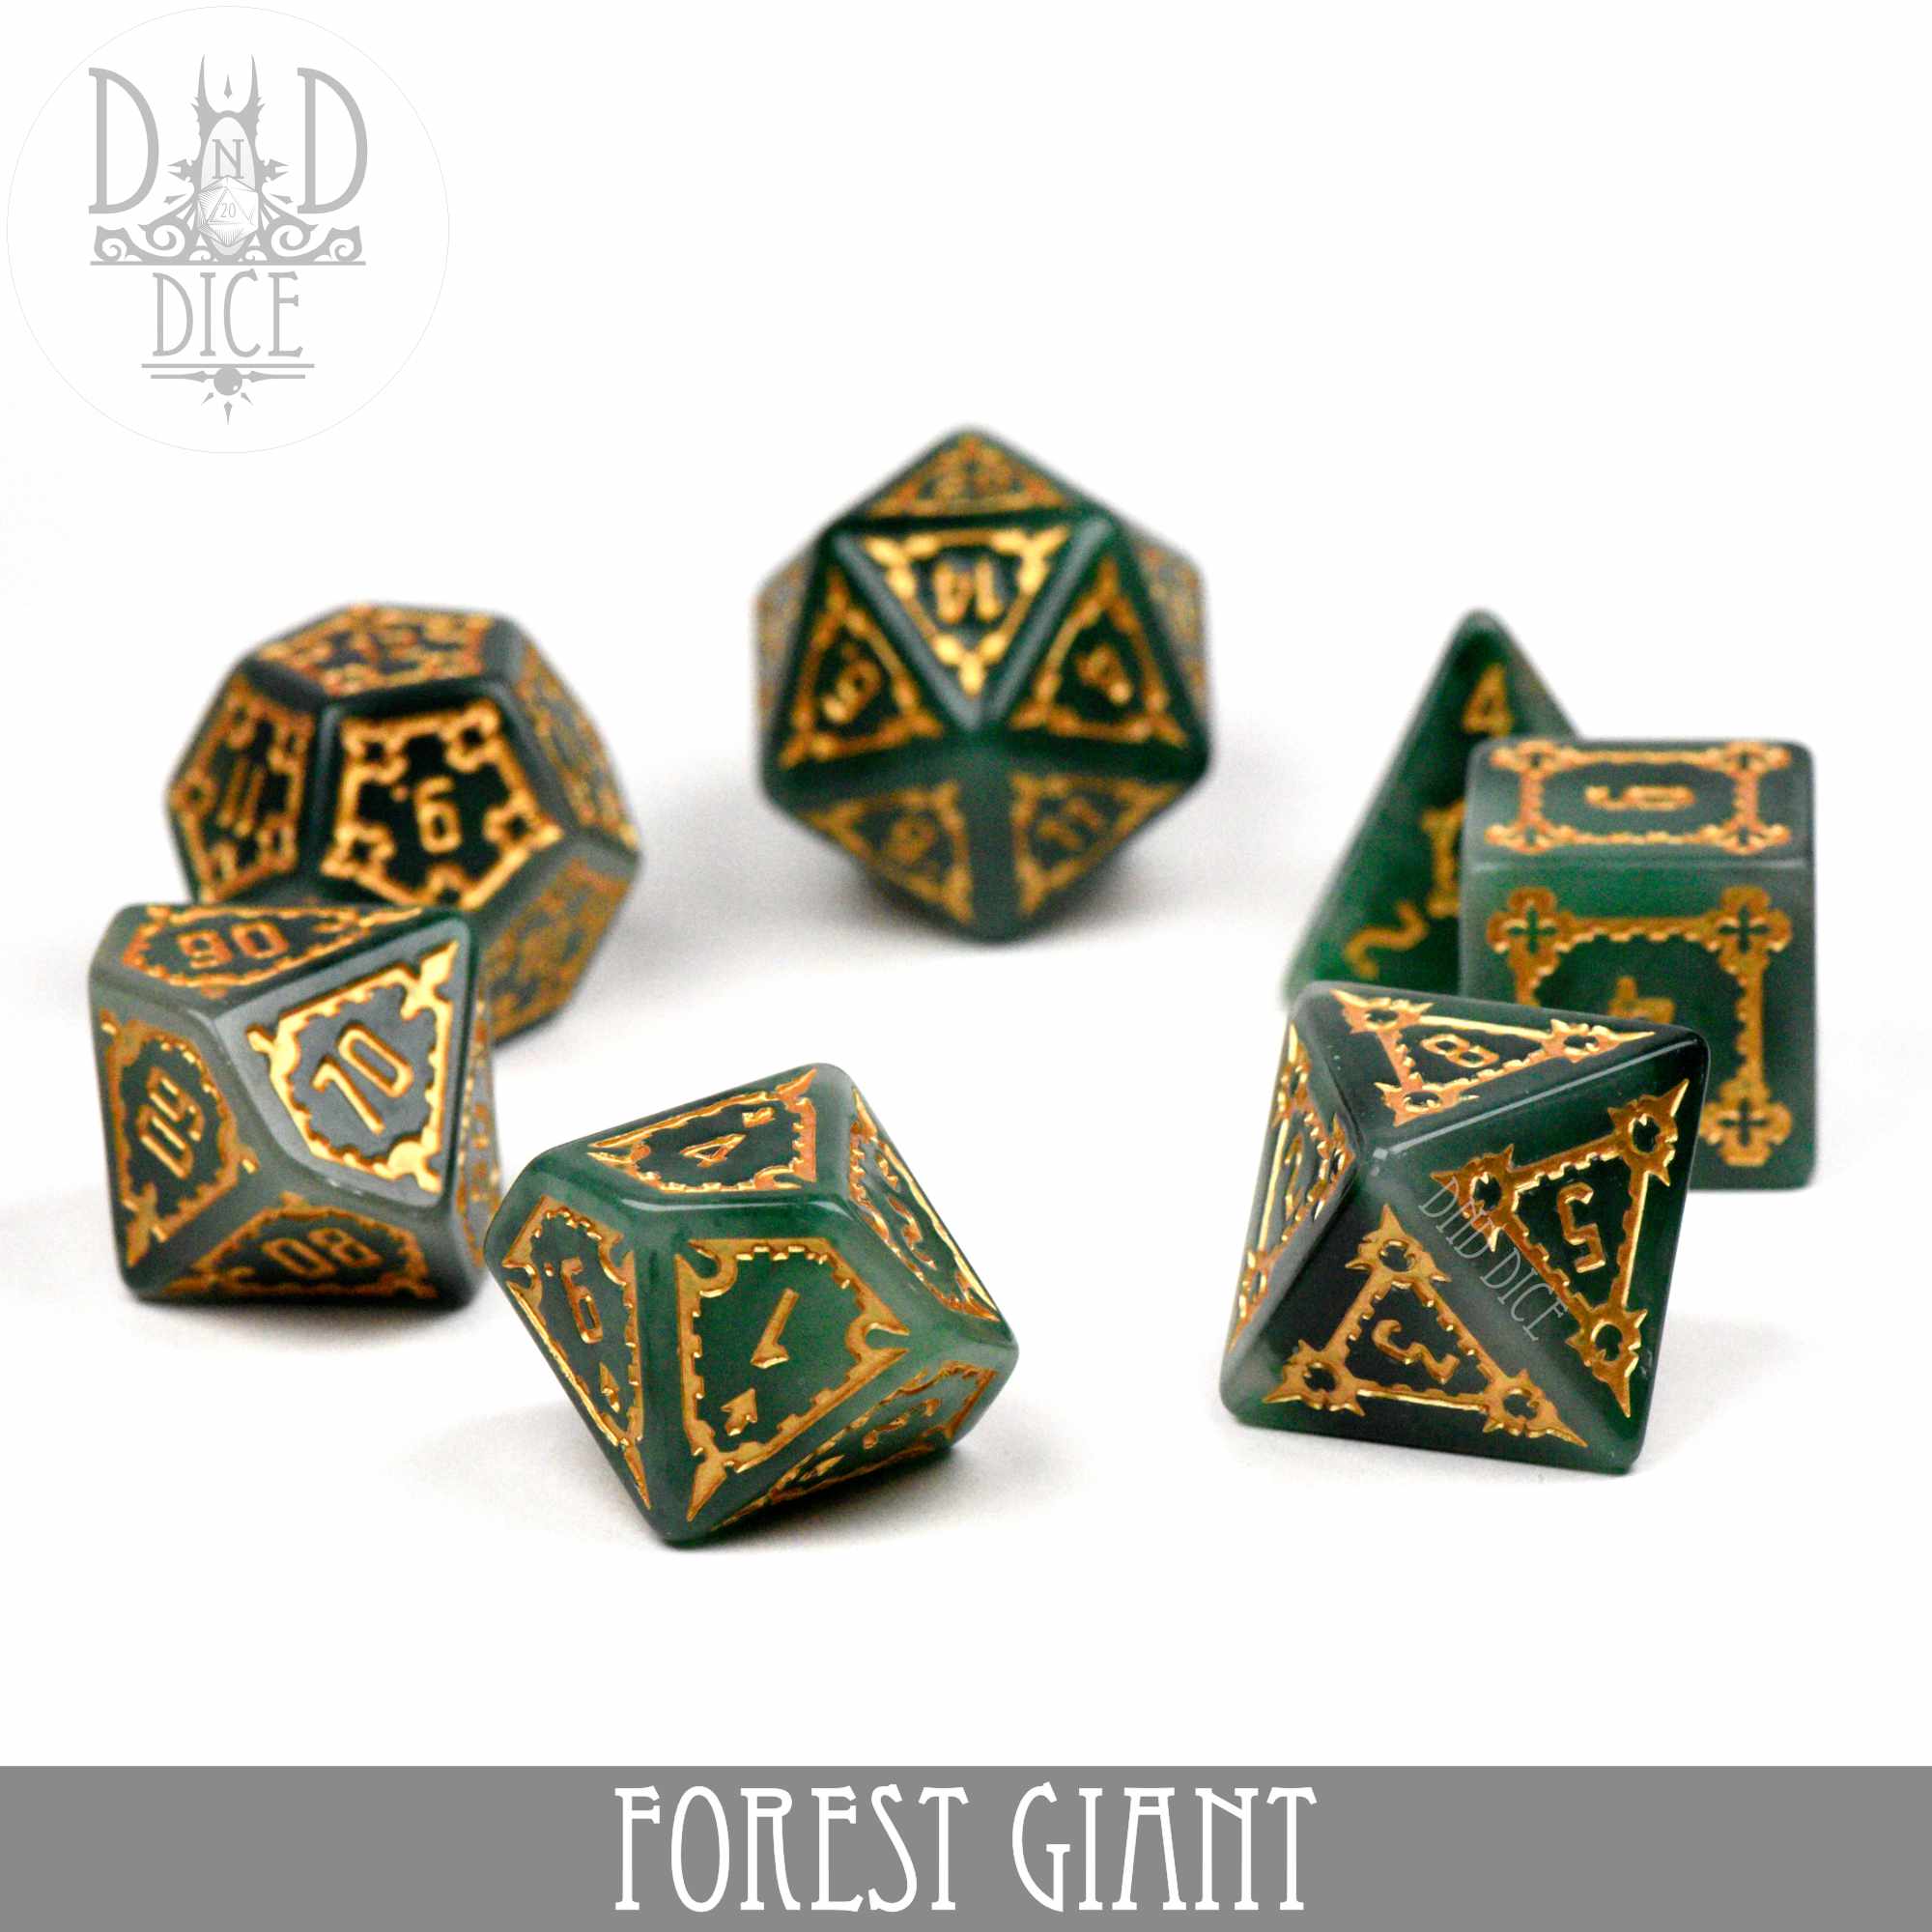 Forest Giant Dice Set (Oversize)